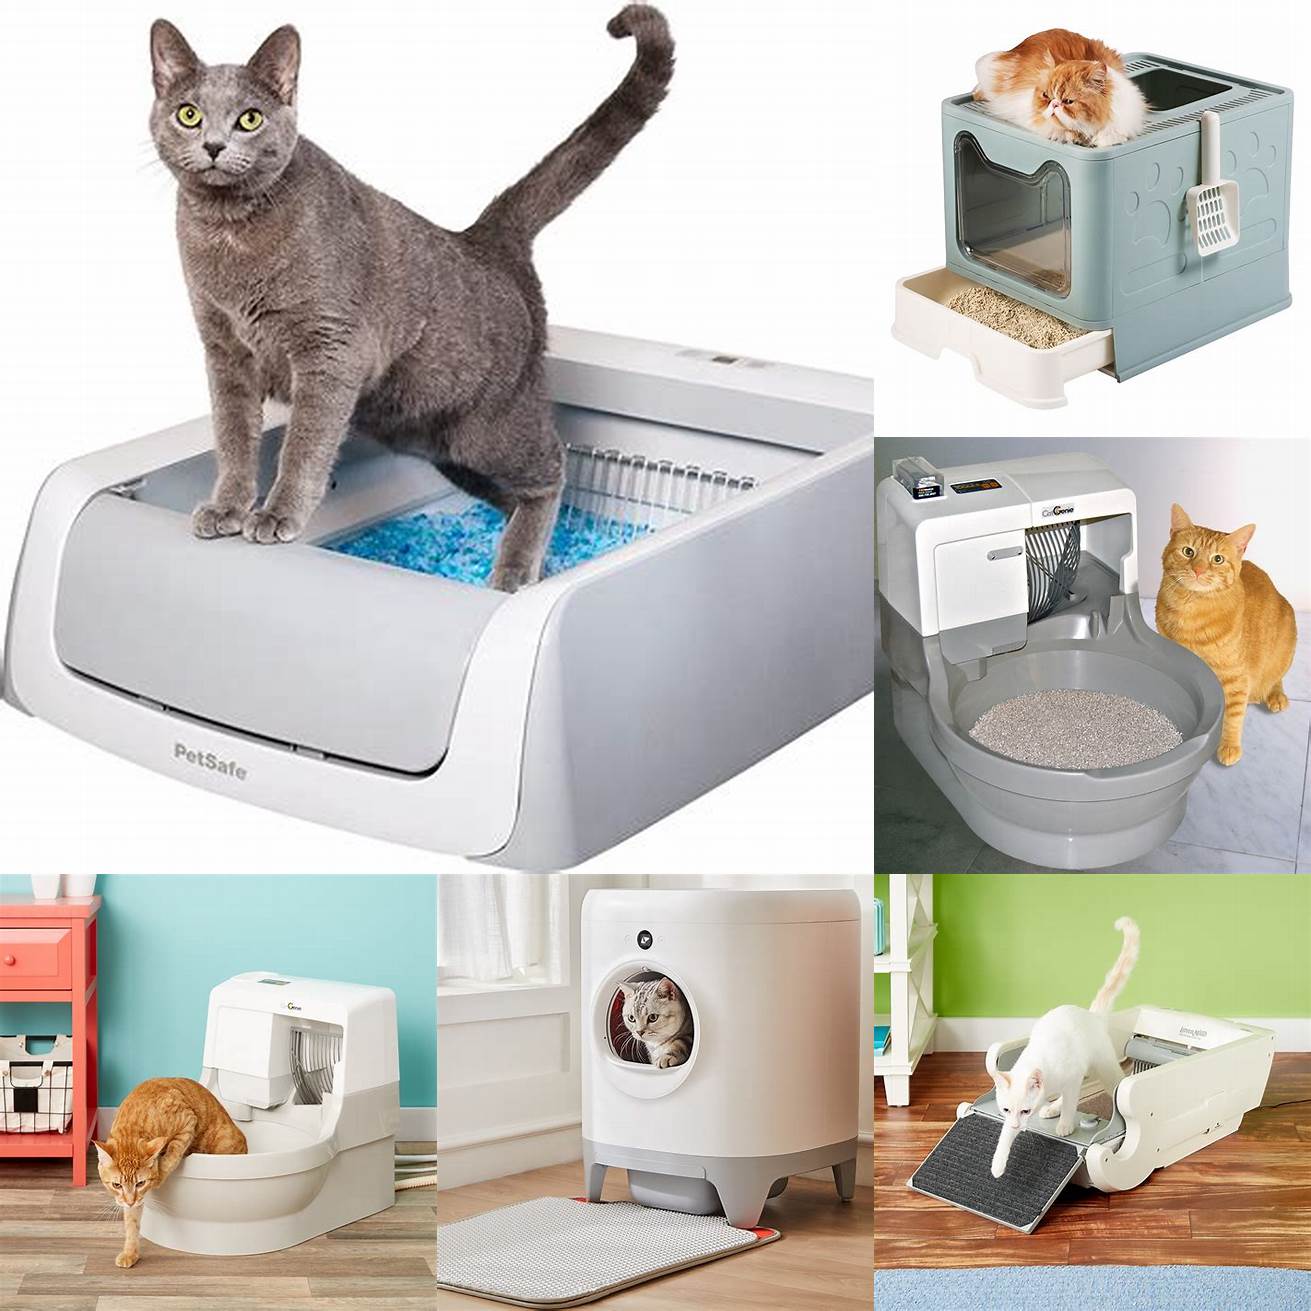 Provide a comfortable and clean litter box